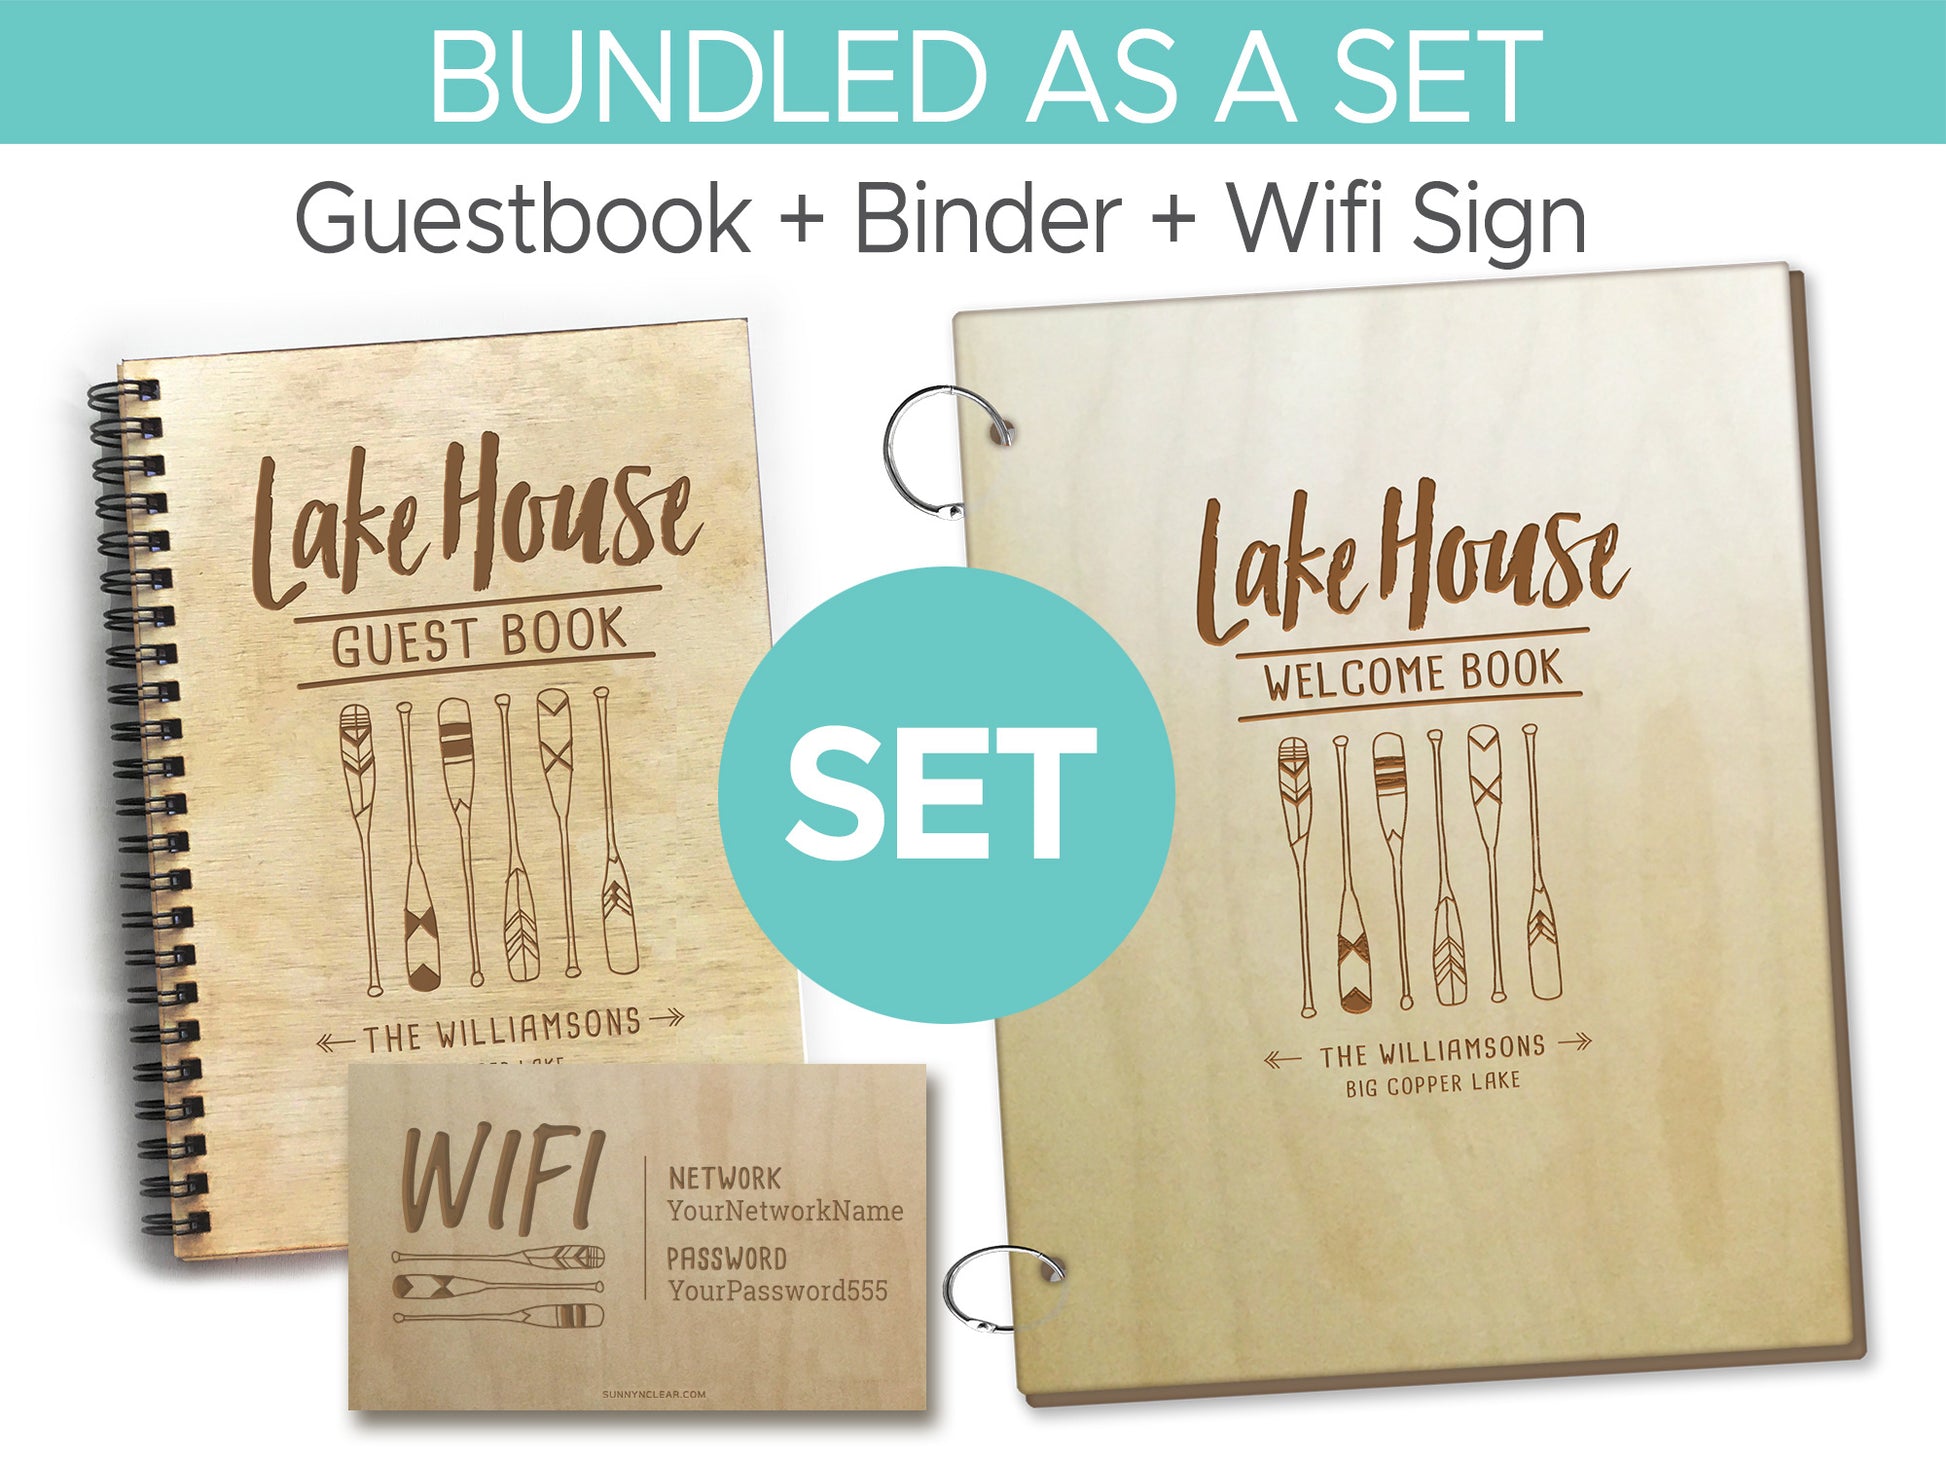 Guest Book: Sign In Visitor Log Book For Vacation Home, Rental